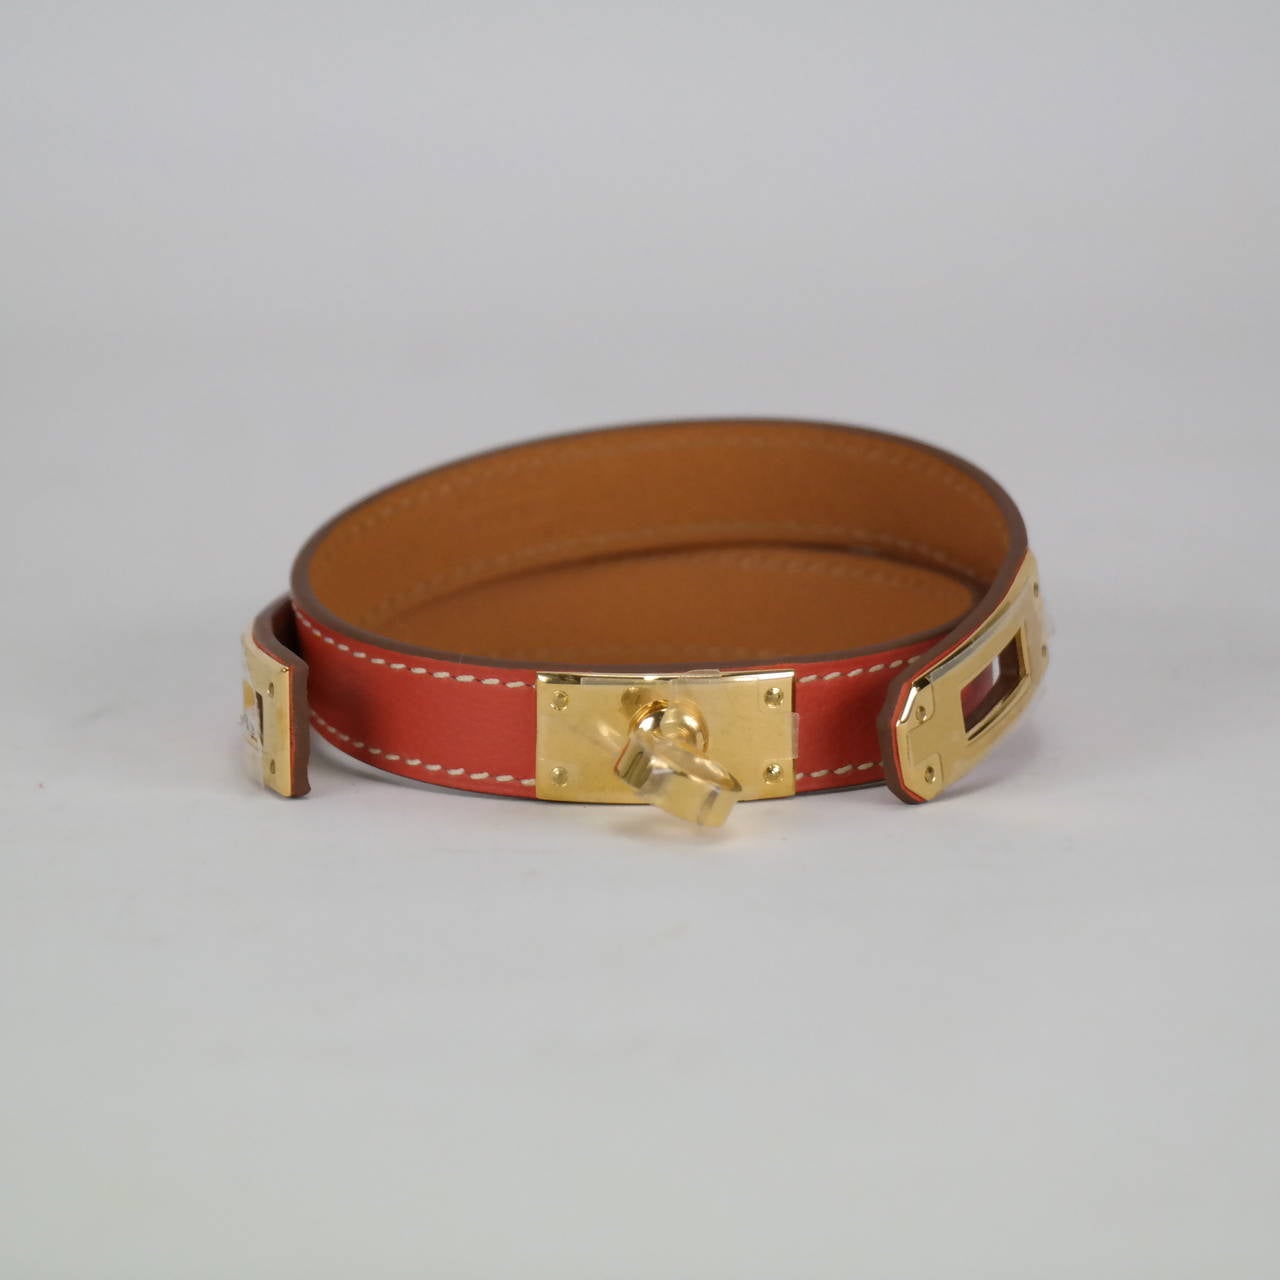 HERMES 2015 BRACELET CUIR KELLY DOUBLE TOUR EPSOM ROSE JAIPUR GOLD HARDWARE SIZE S

Pre-owned and never used

Bought it in herm store in 2015.

Size; S

Date stamp: T

Color; ROSE JAIPUR

Model; KELLY DOUBLE TOUR

-Original